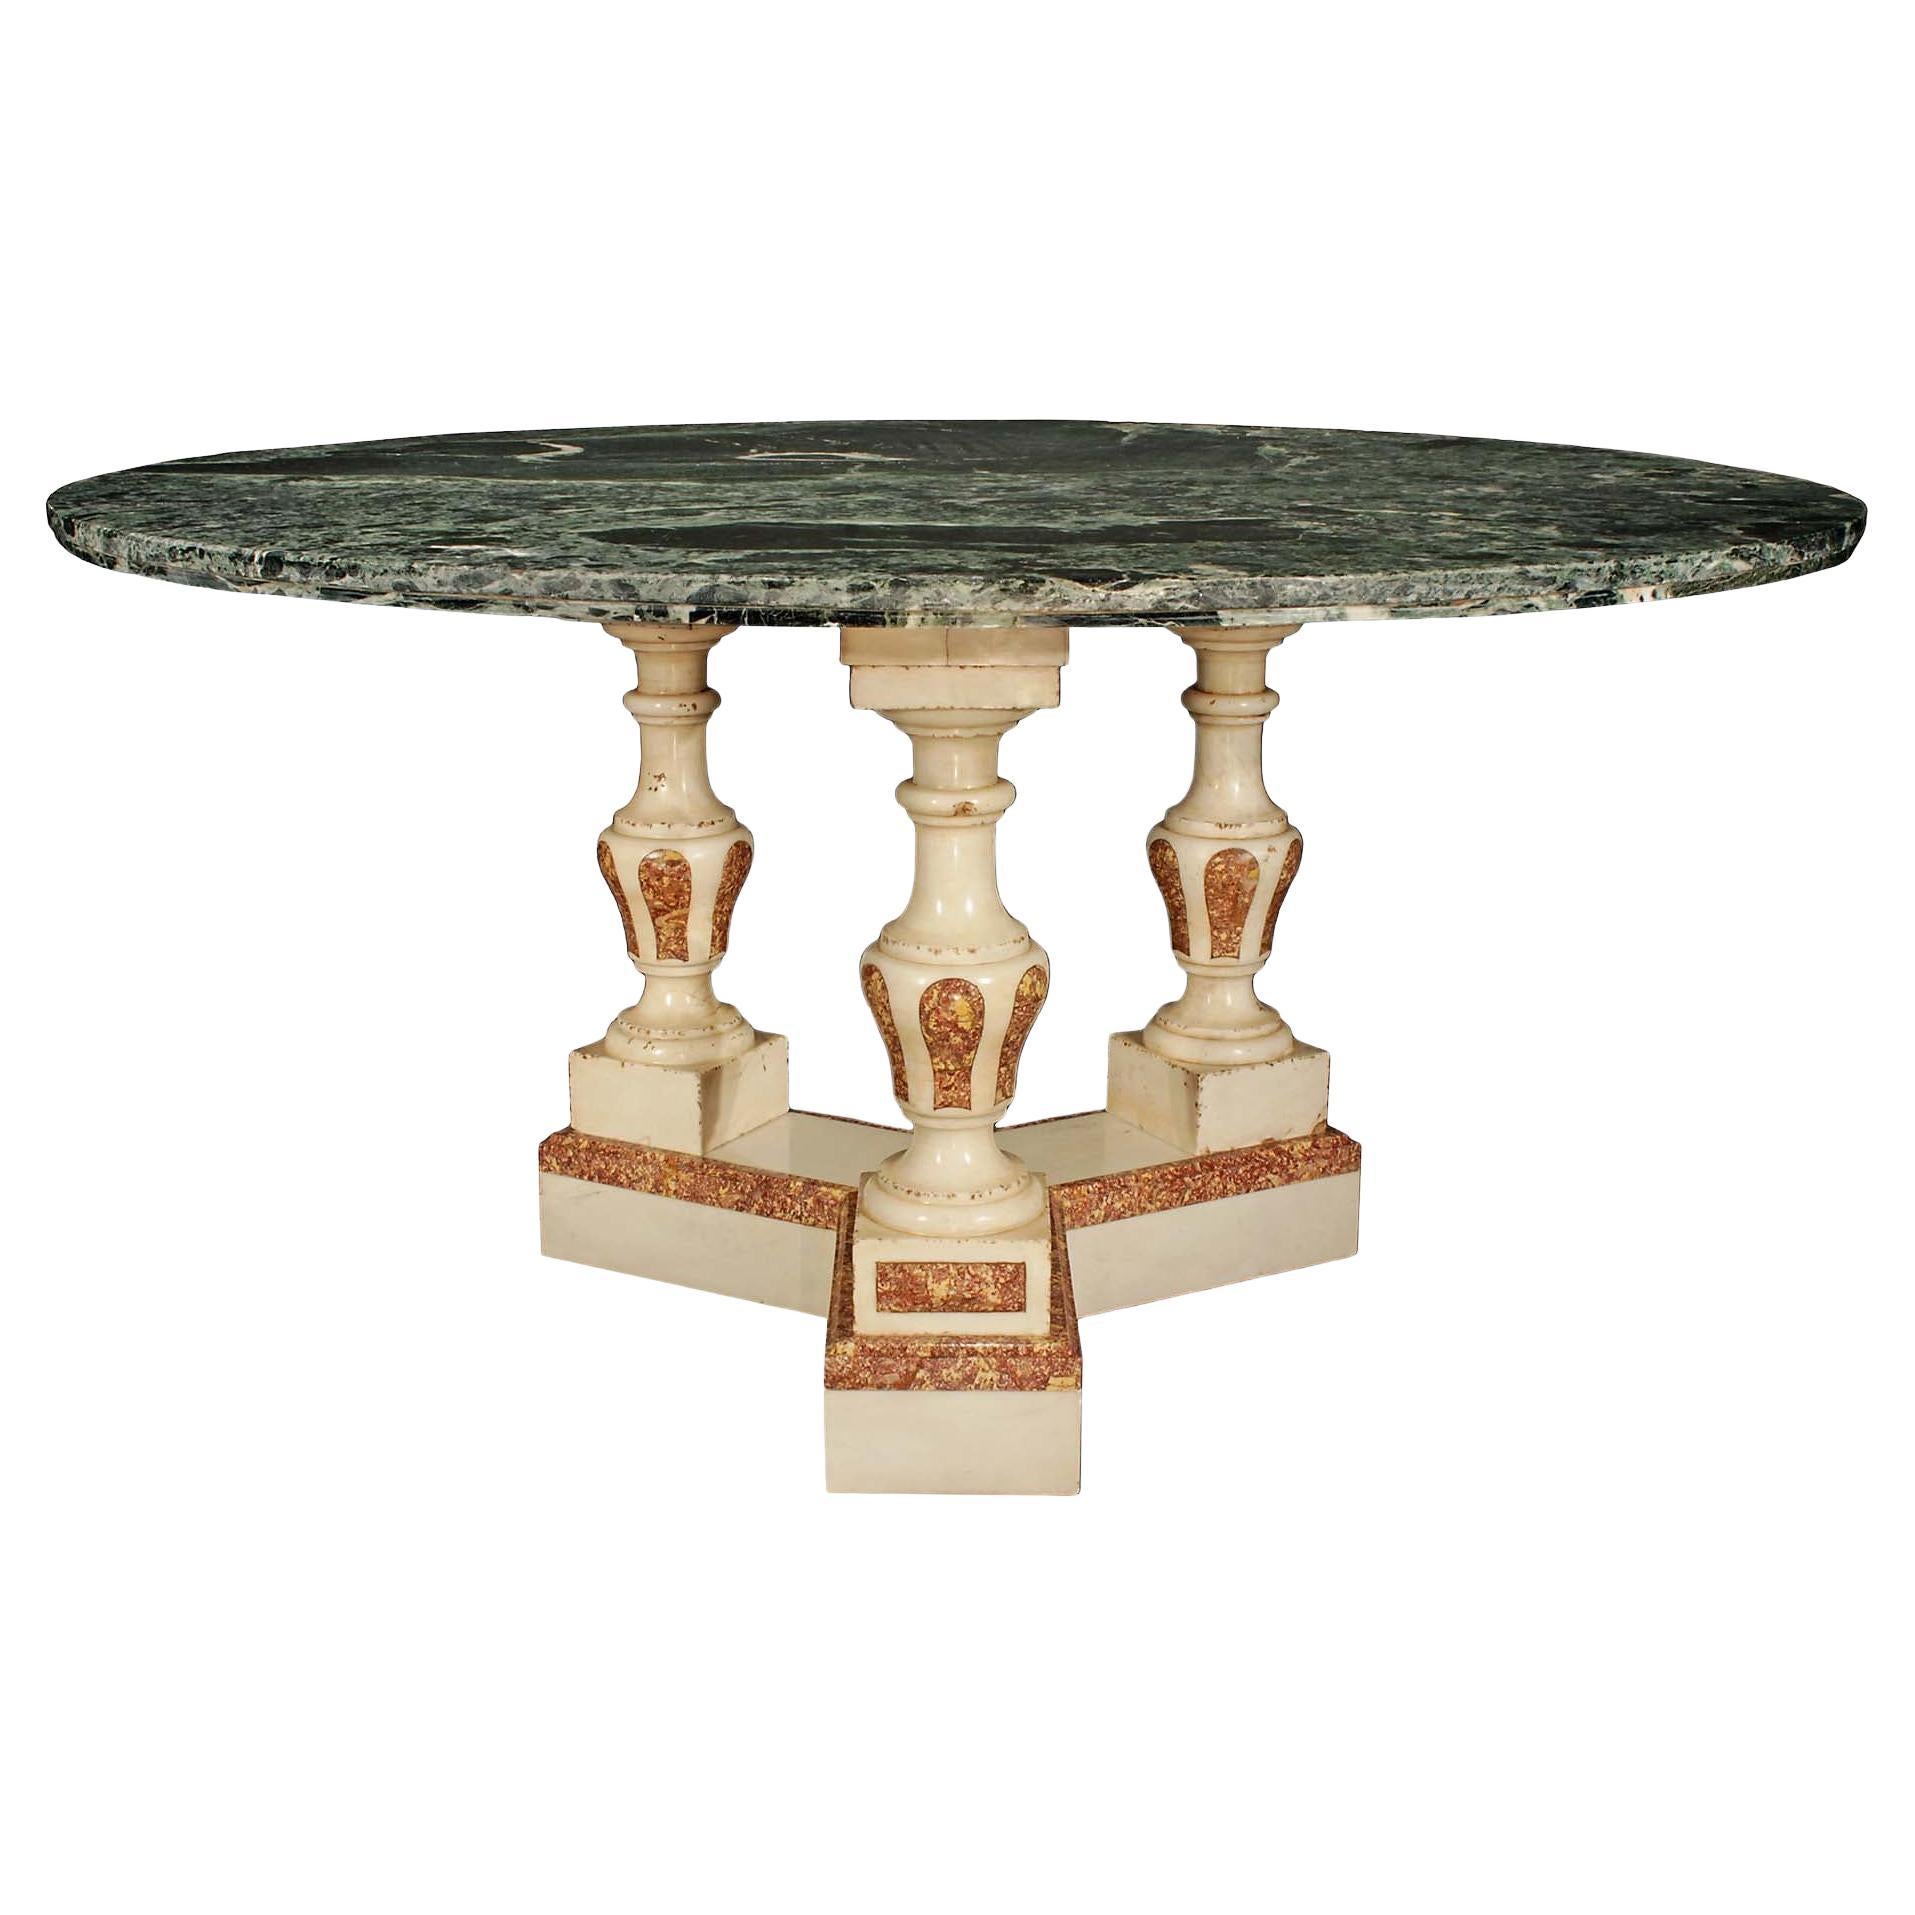 Italian 19th Century Neoclassical Style Marble Center Table